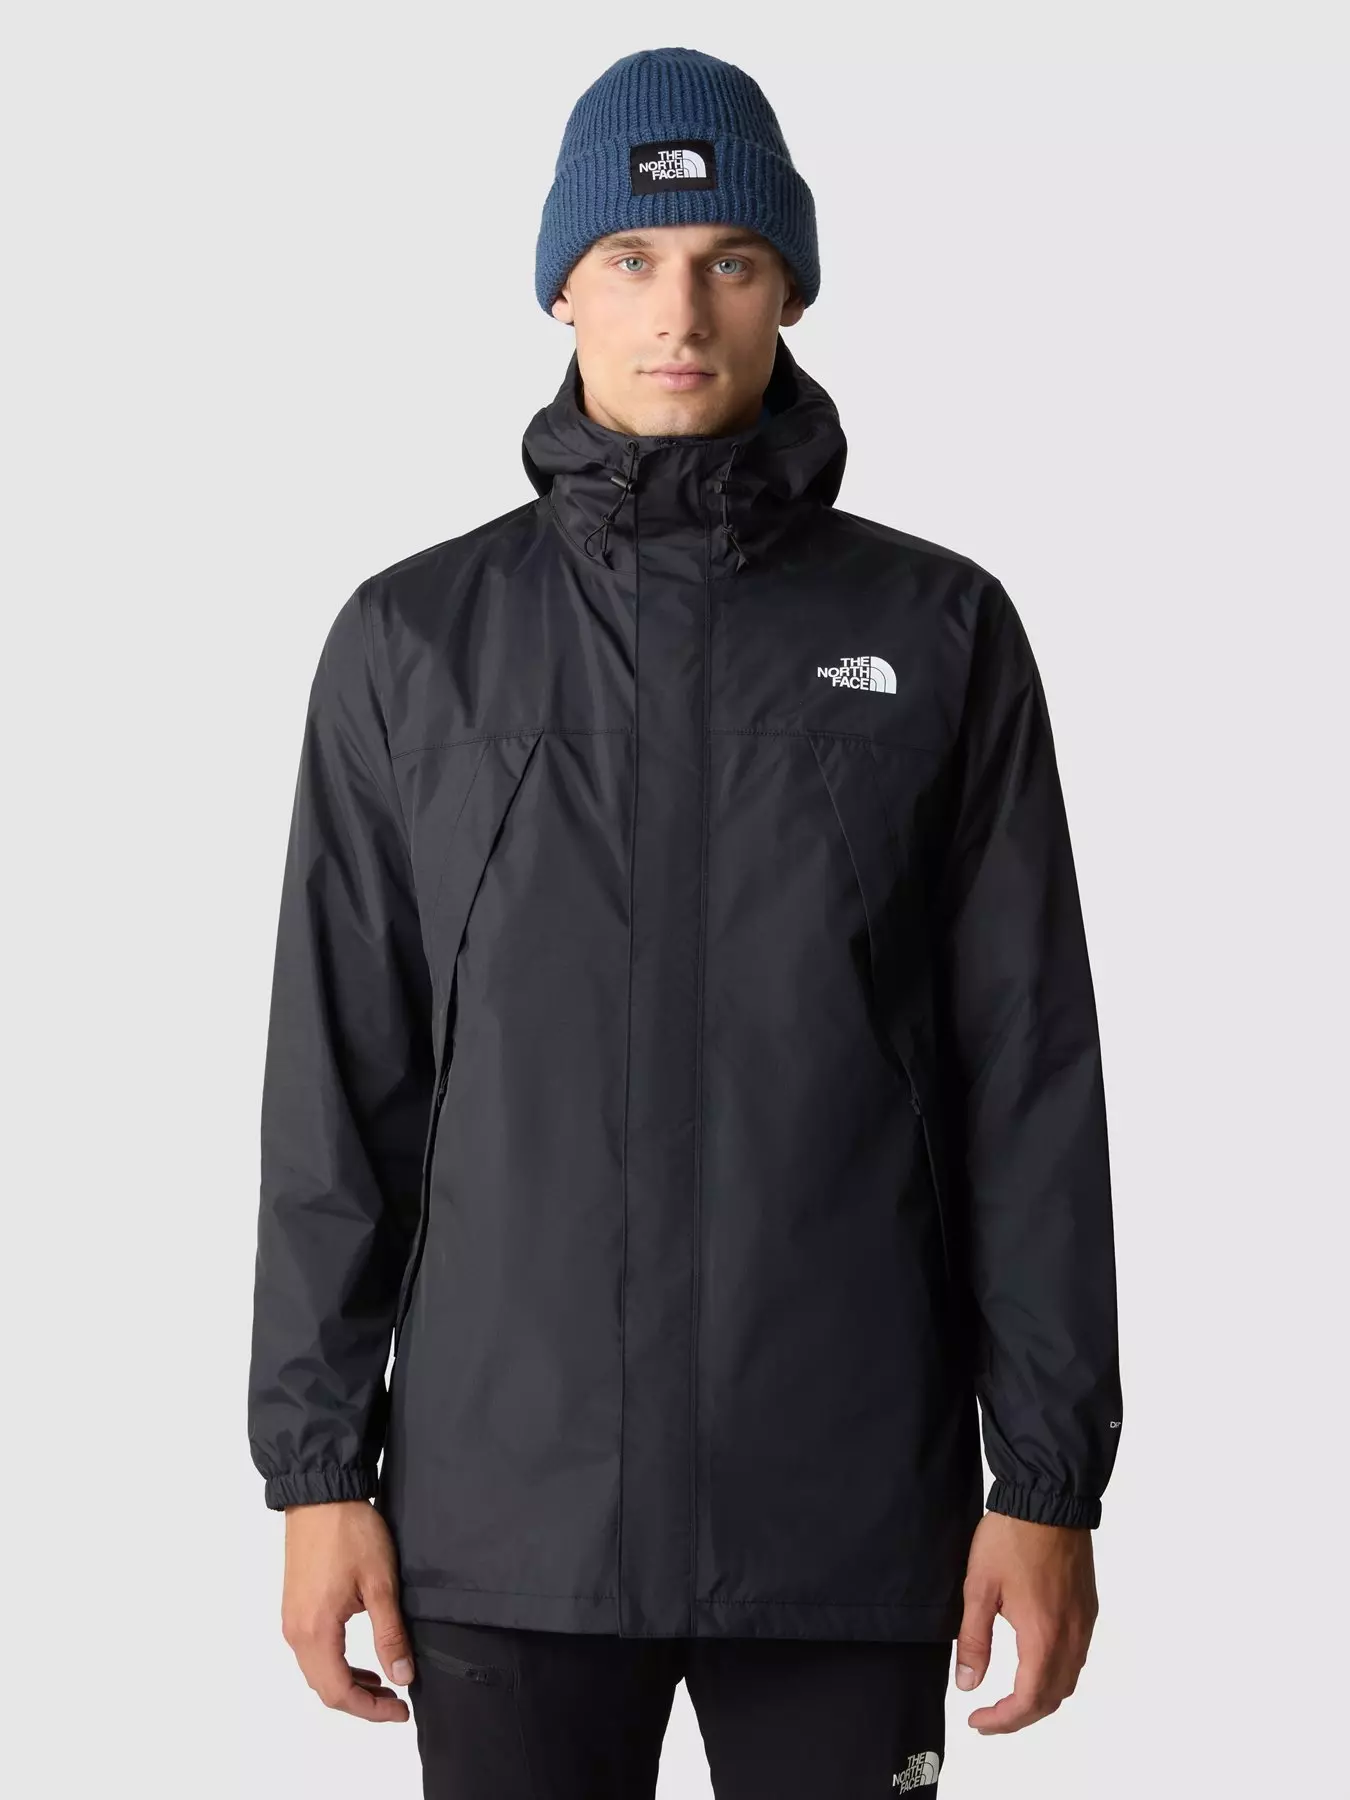 The North Face Mountain Athletics FlashDry wind jacket in black